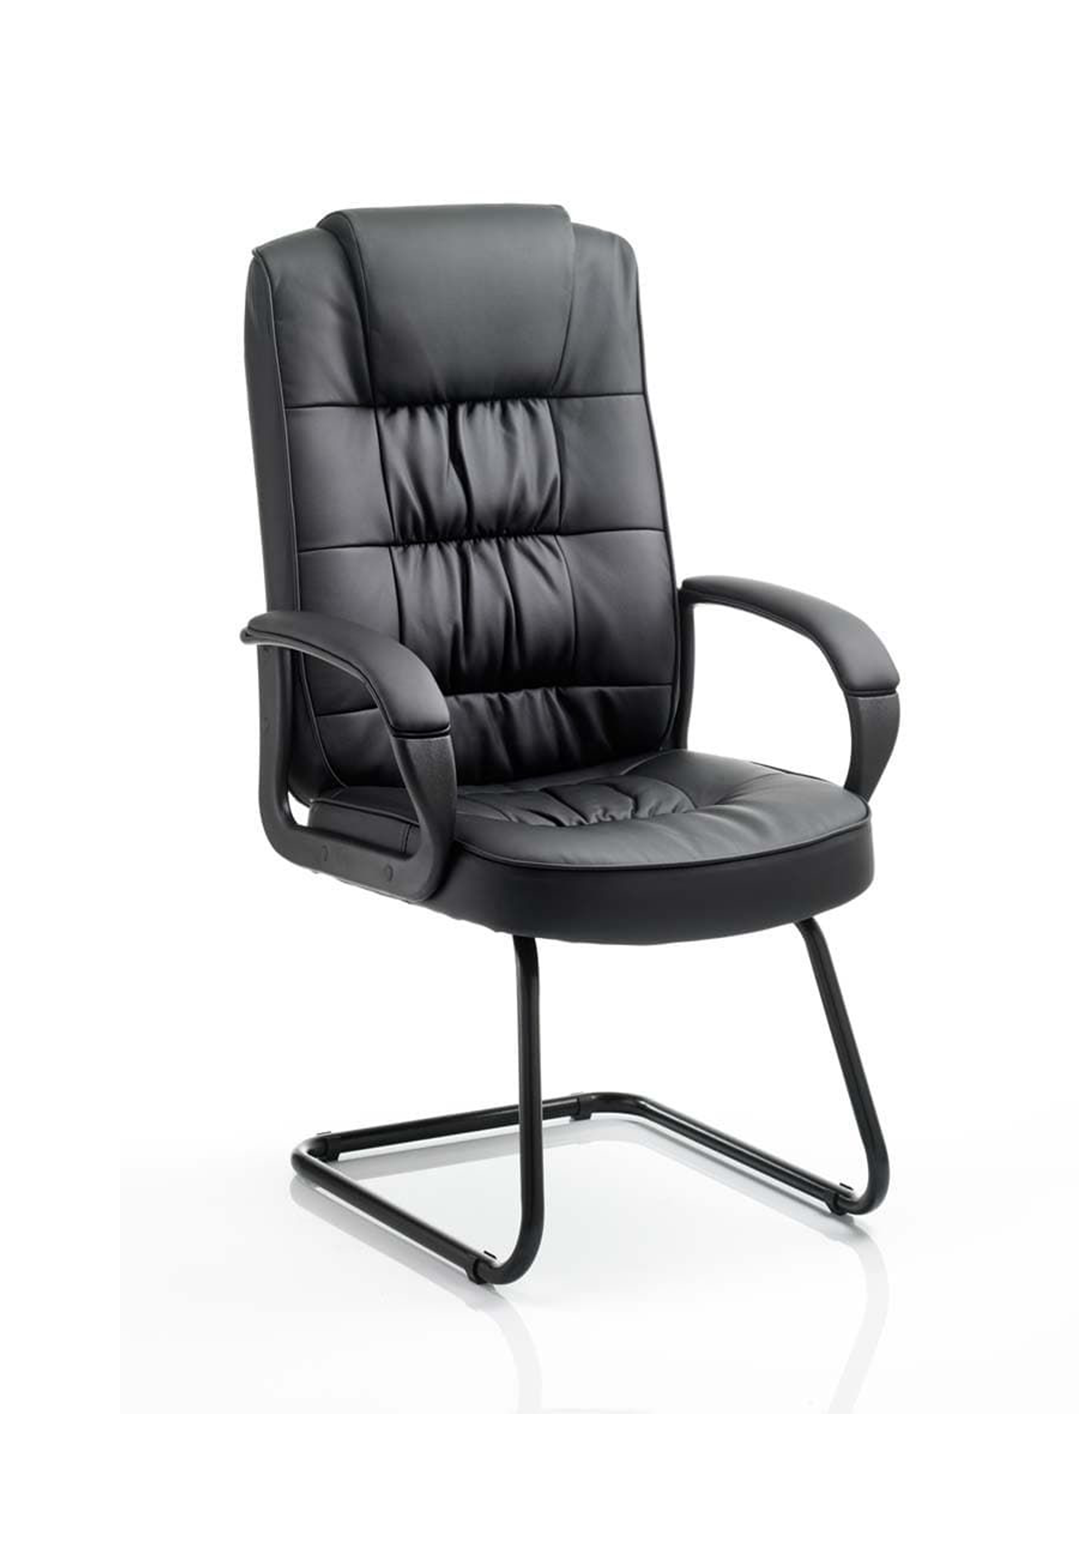 Moore Deluxe High Back Black Cantilever Visitor Chair with Arms